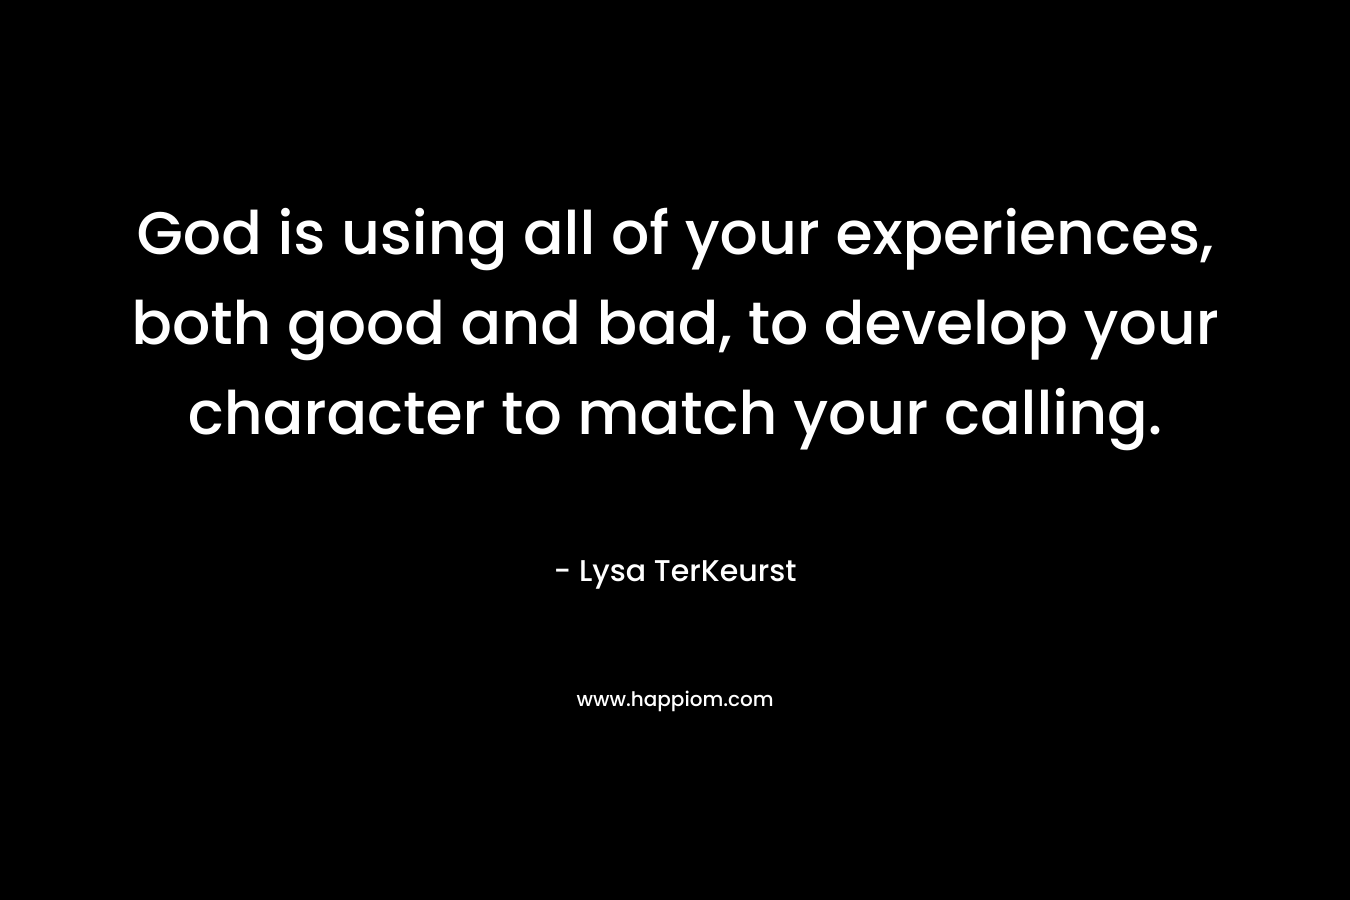 God is using all of your experiences, both good and bad, to develop your character to match your calling.